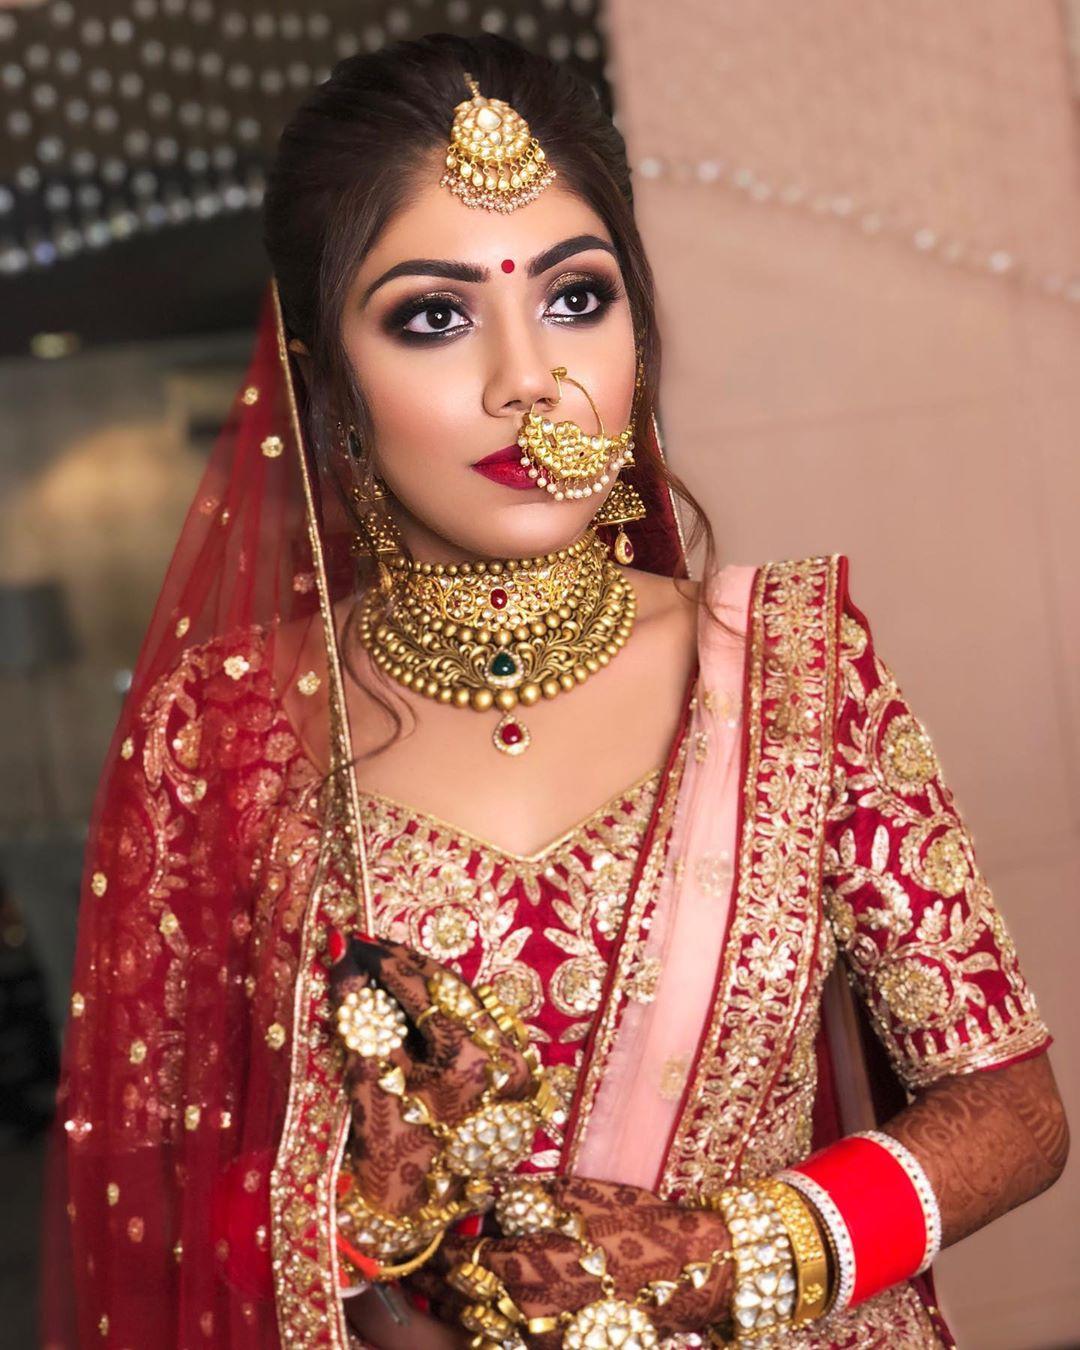 Derive Centrum Aktuator Airbrush Bridal Makeup: Why Opt For It For Your Bridal Look